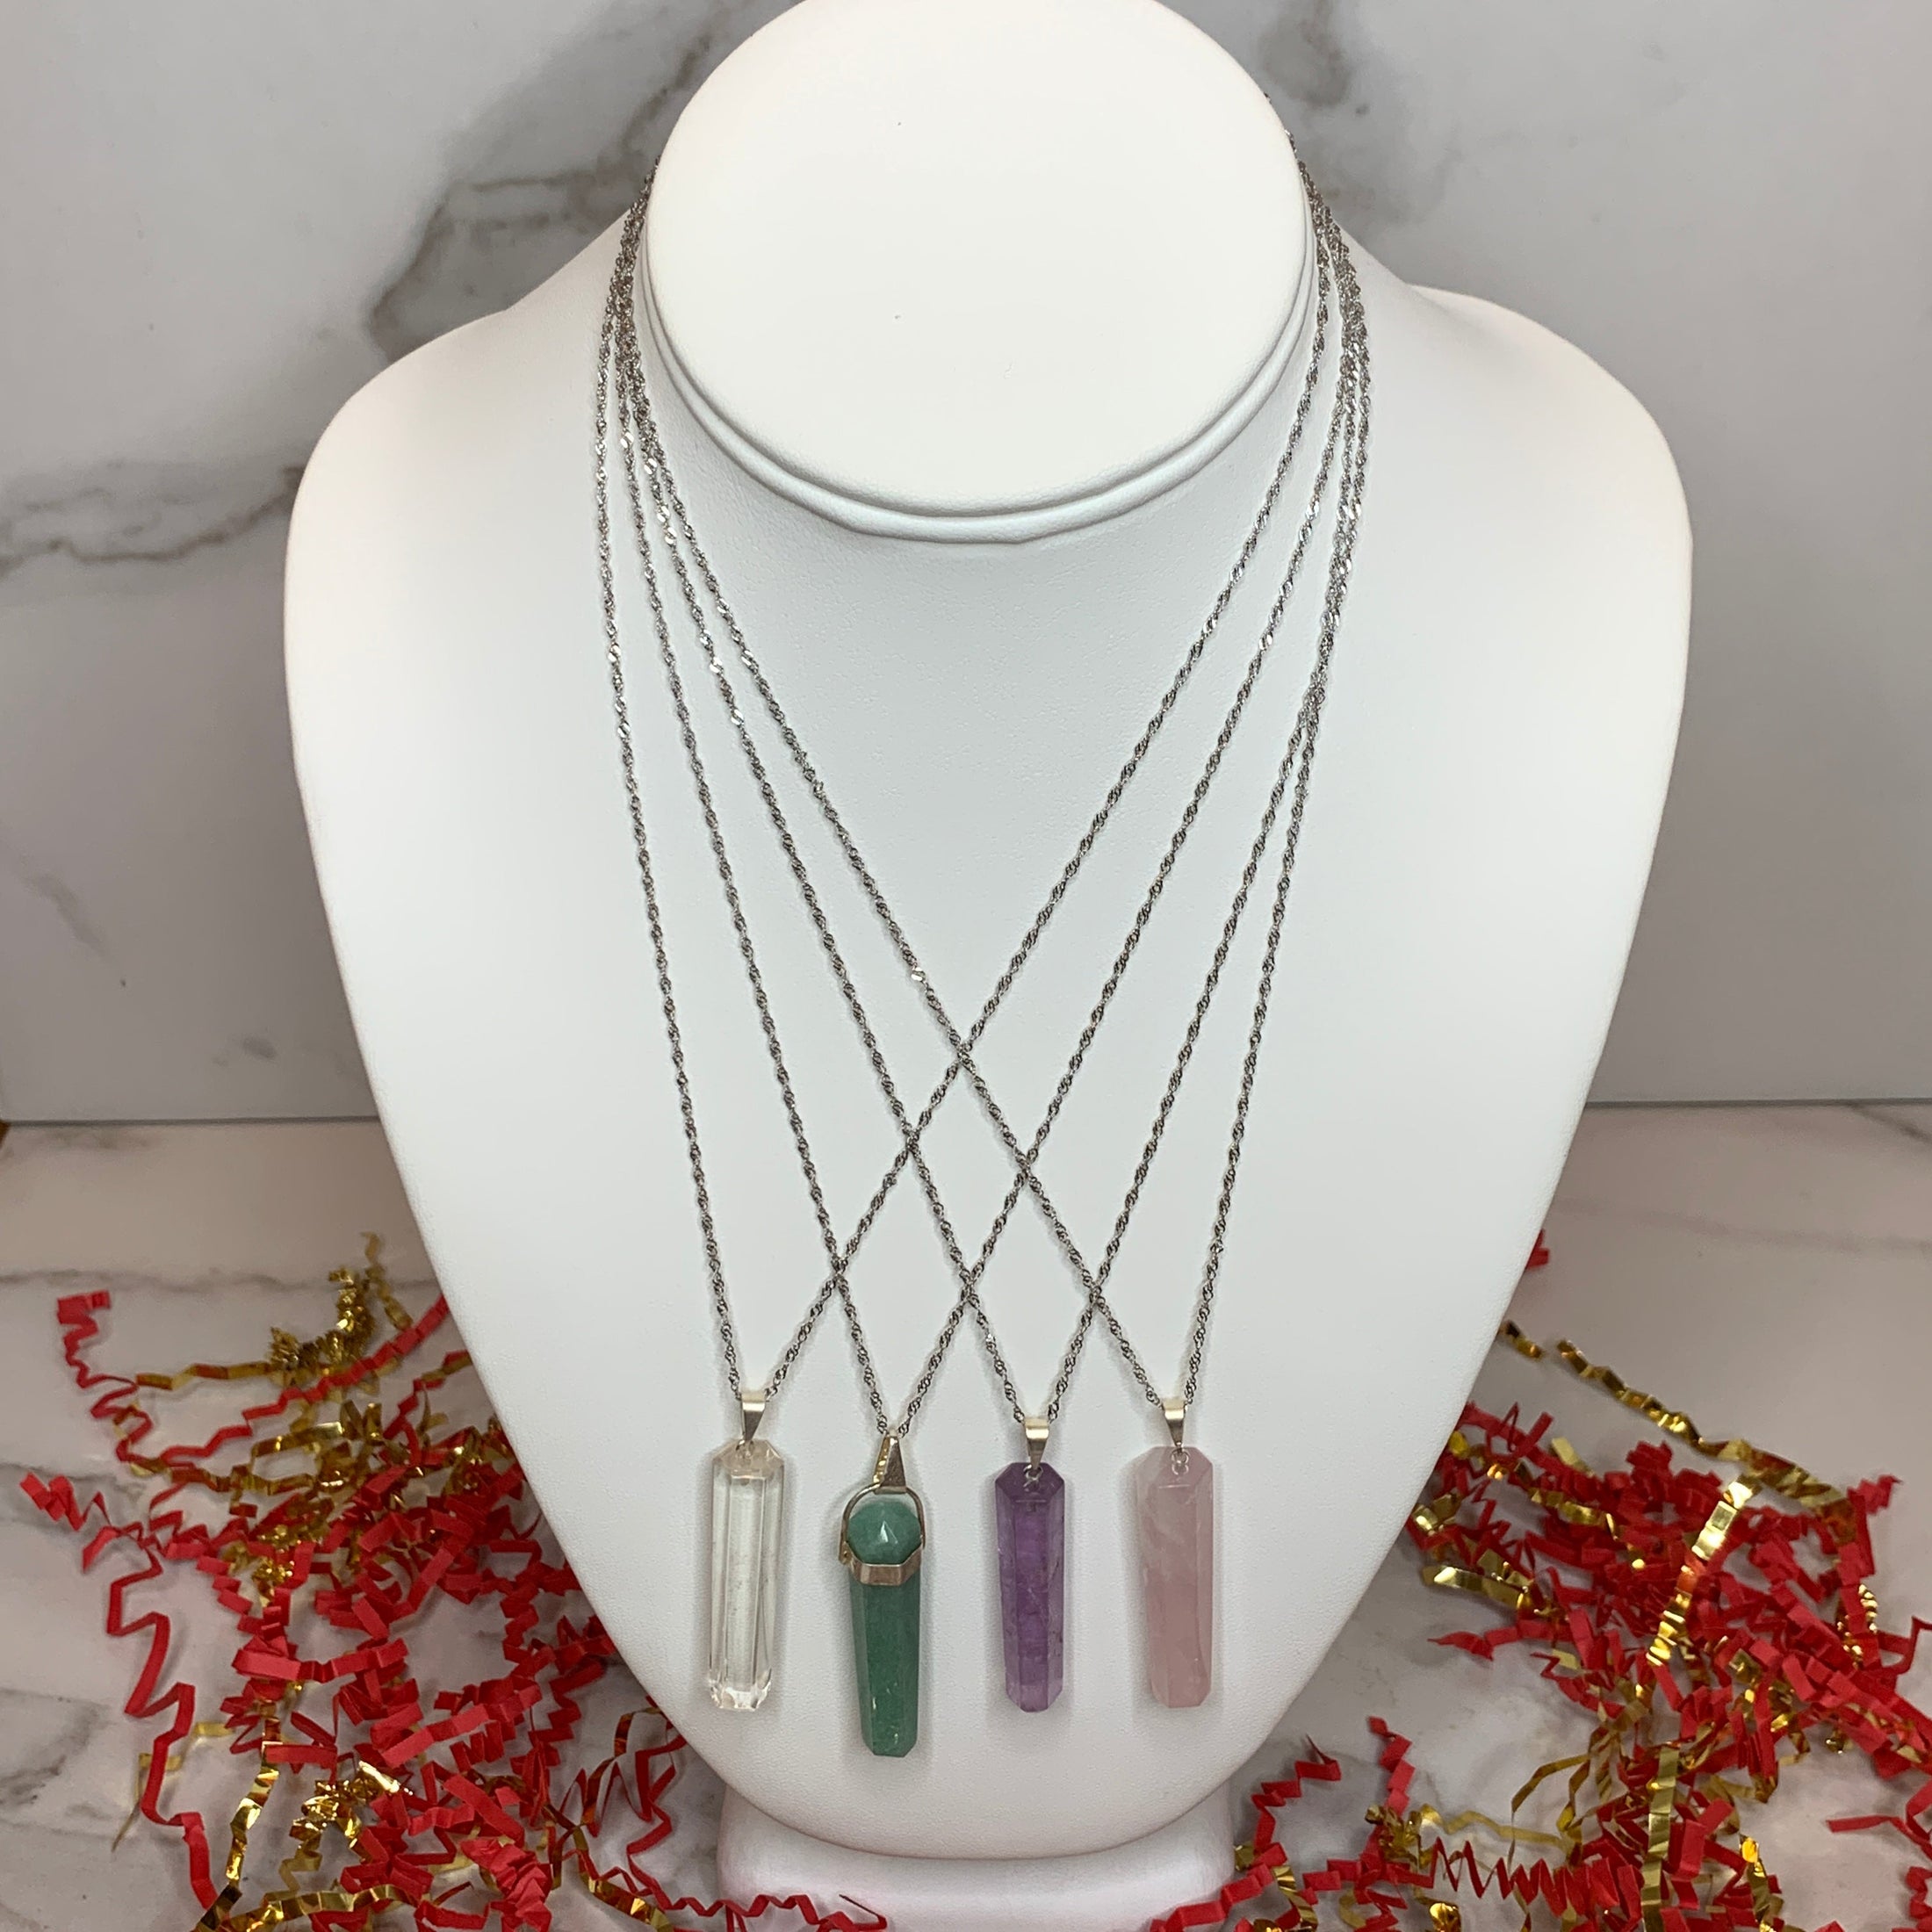 Healing Crystal Pendant Necklace